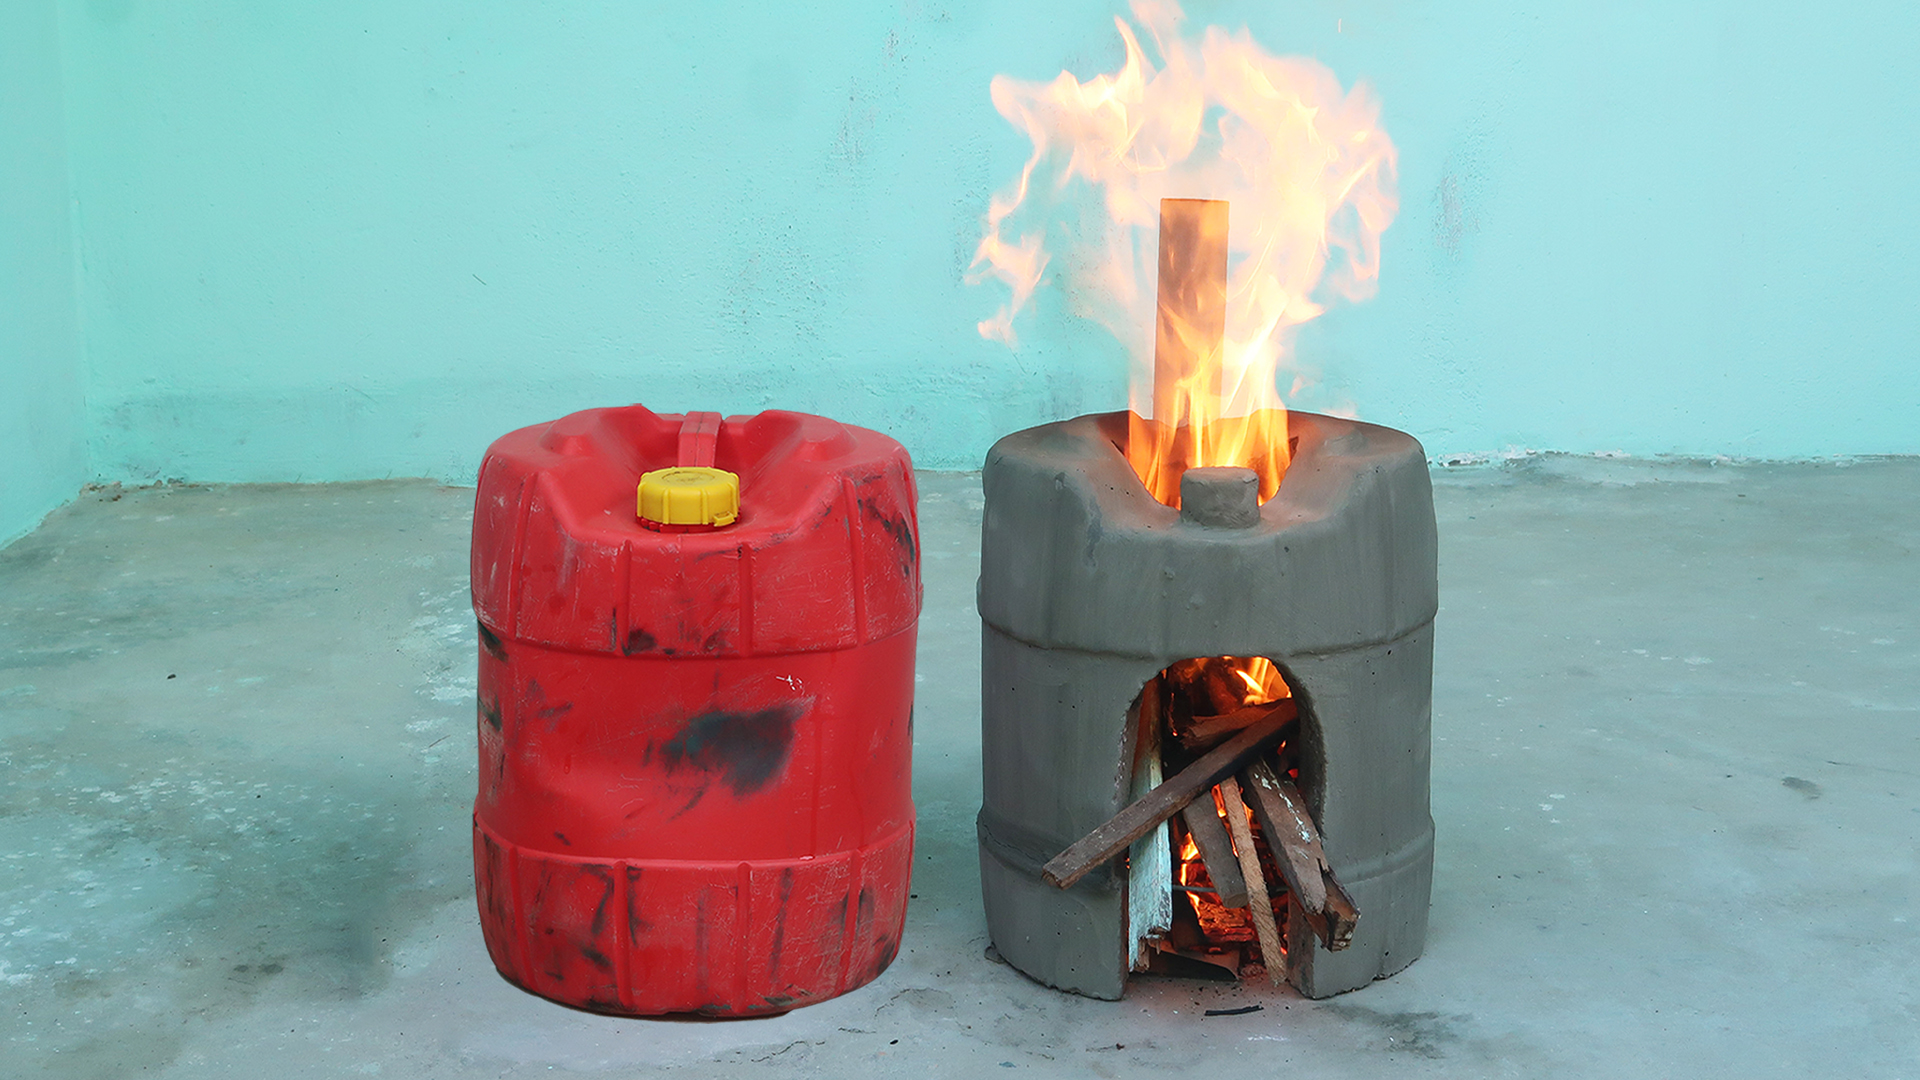 Creative Wood Stove Ideas From Plastic Container | DIY Smoke Free Cement Stoves